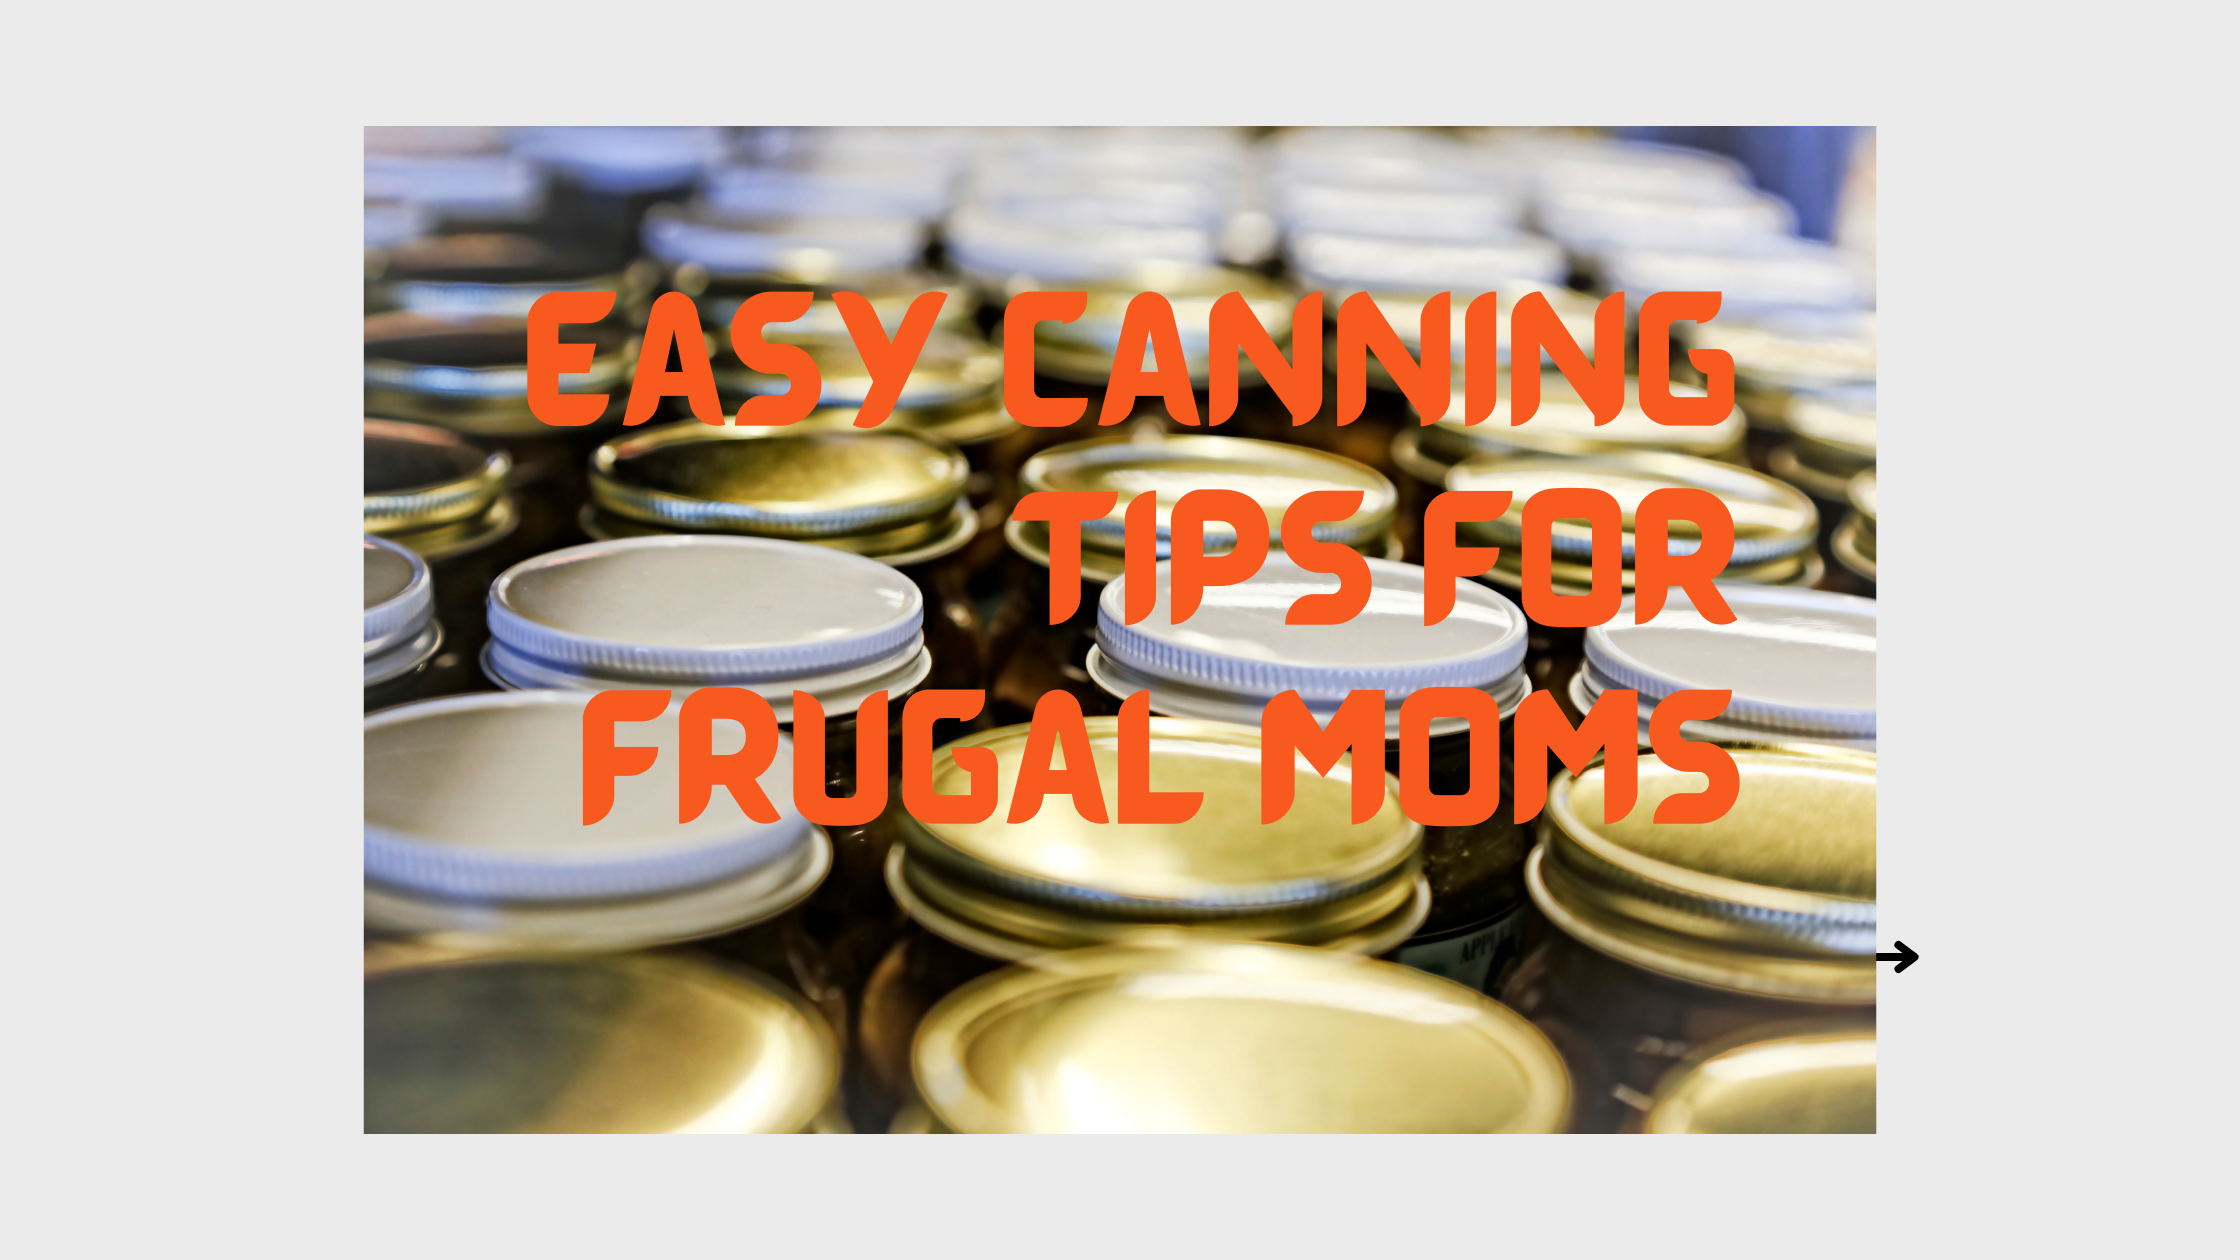 Easy Canning Tips for Frugal Moms